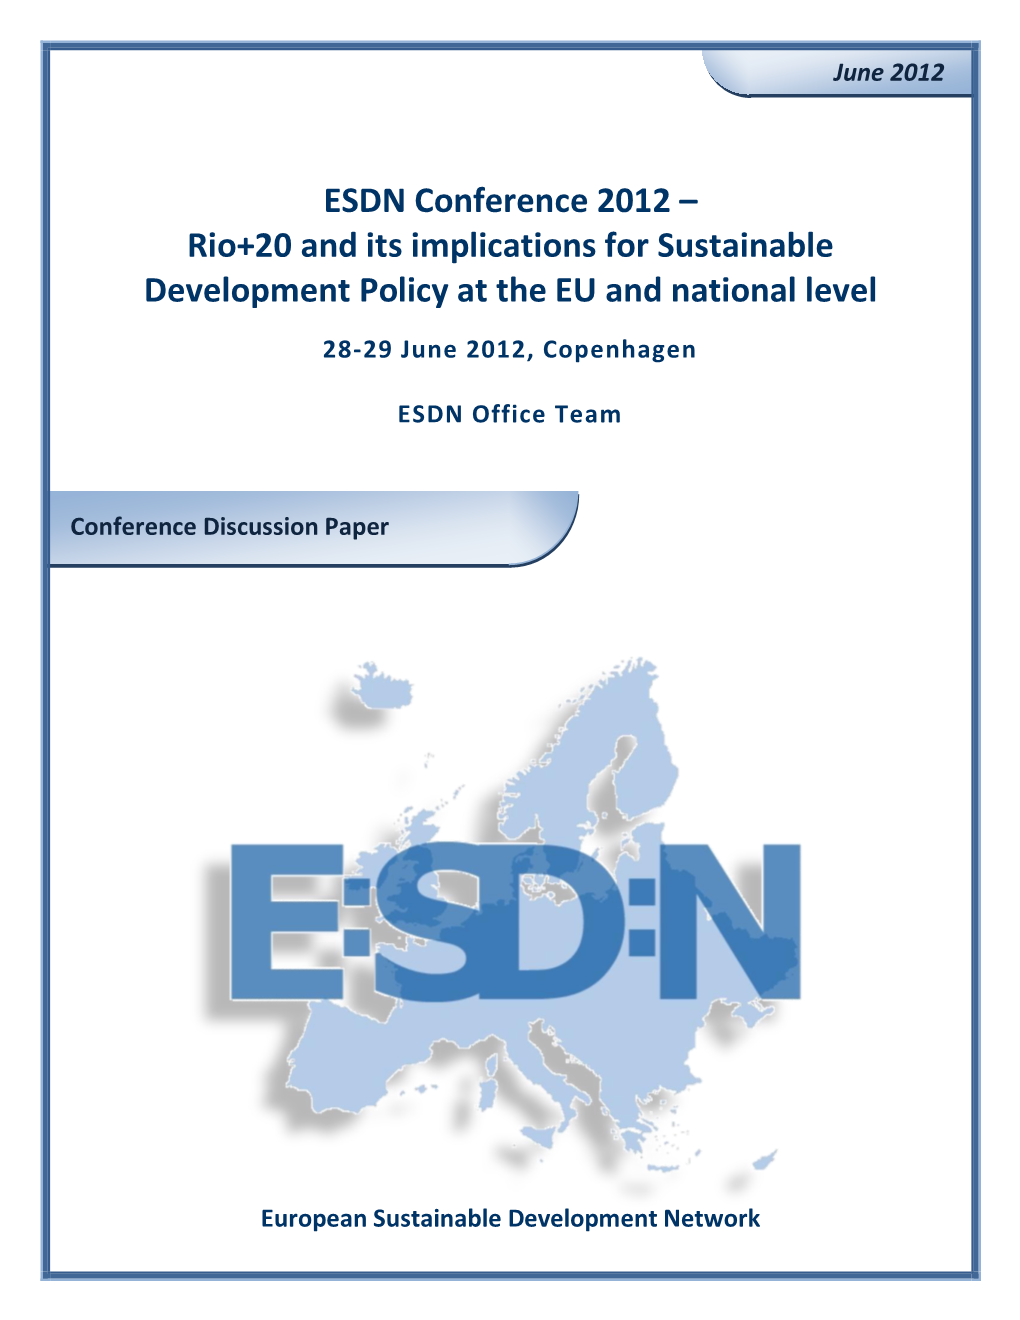 ESDN Conference 2012 – Rio+20 and Its Implications for Sustainable Development Policy at the EU and National Level